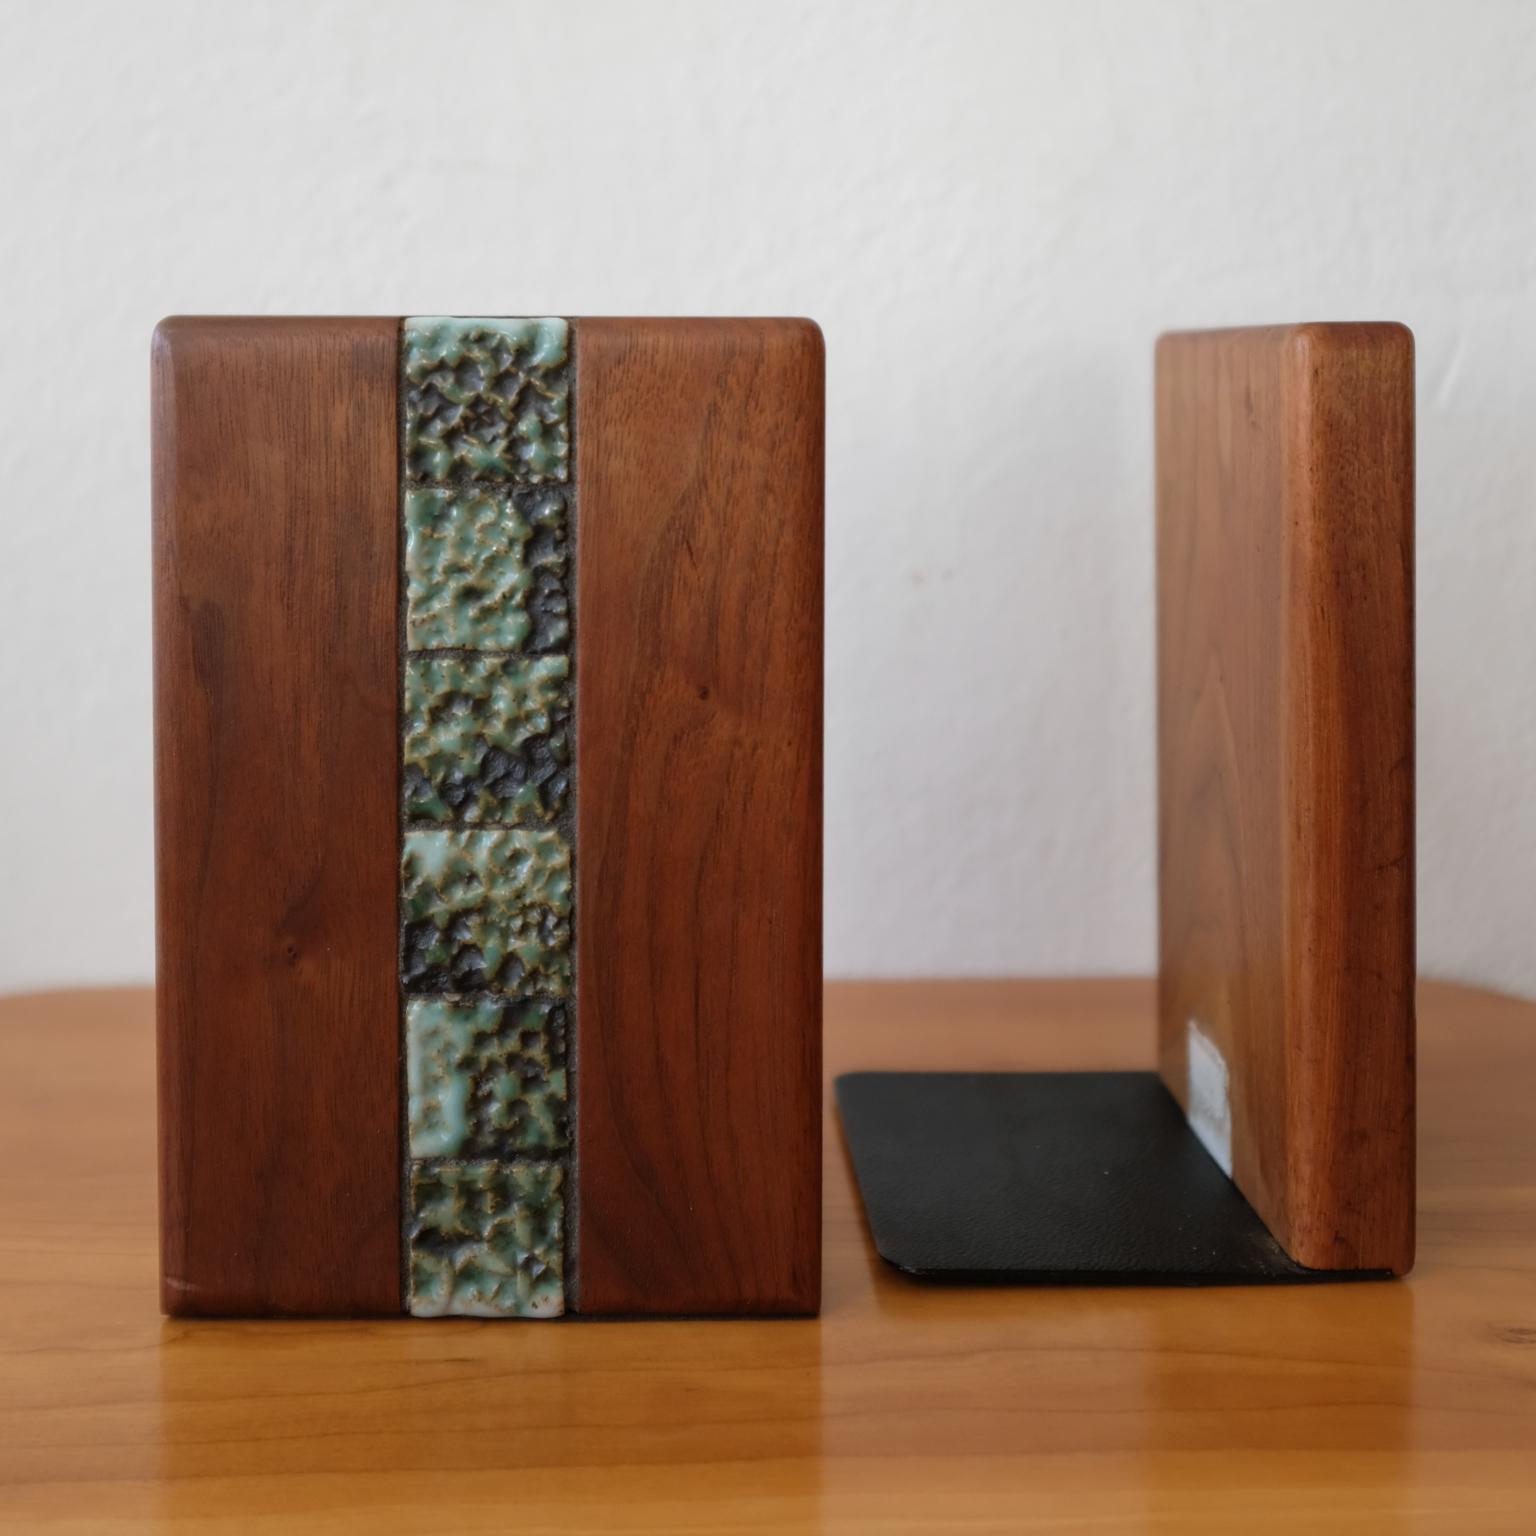 Bookends with ceramic tile by Jane and Gordon Martz for their company, Marshall Studios. Includes a Marshall Studios tag.